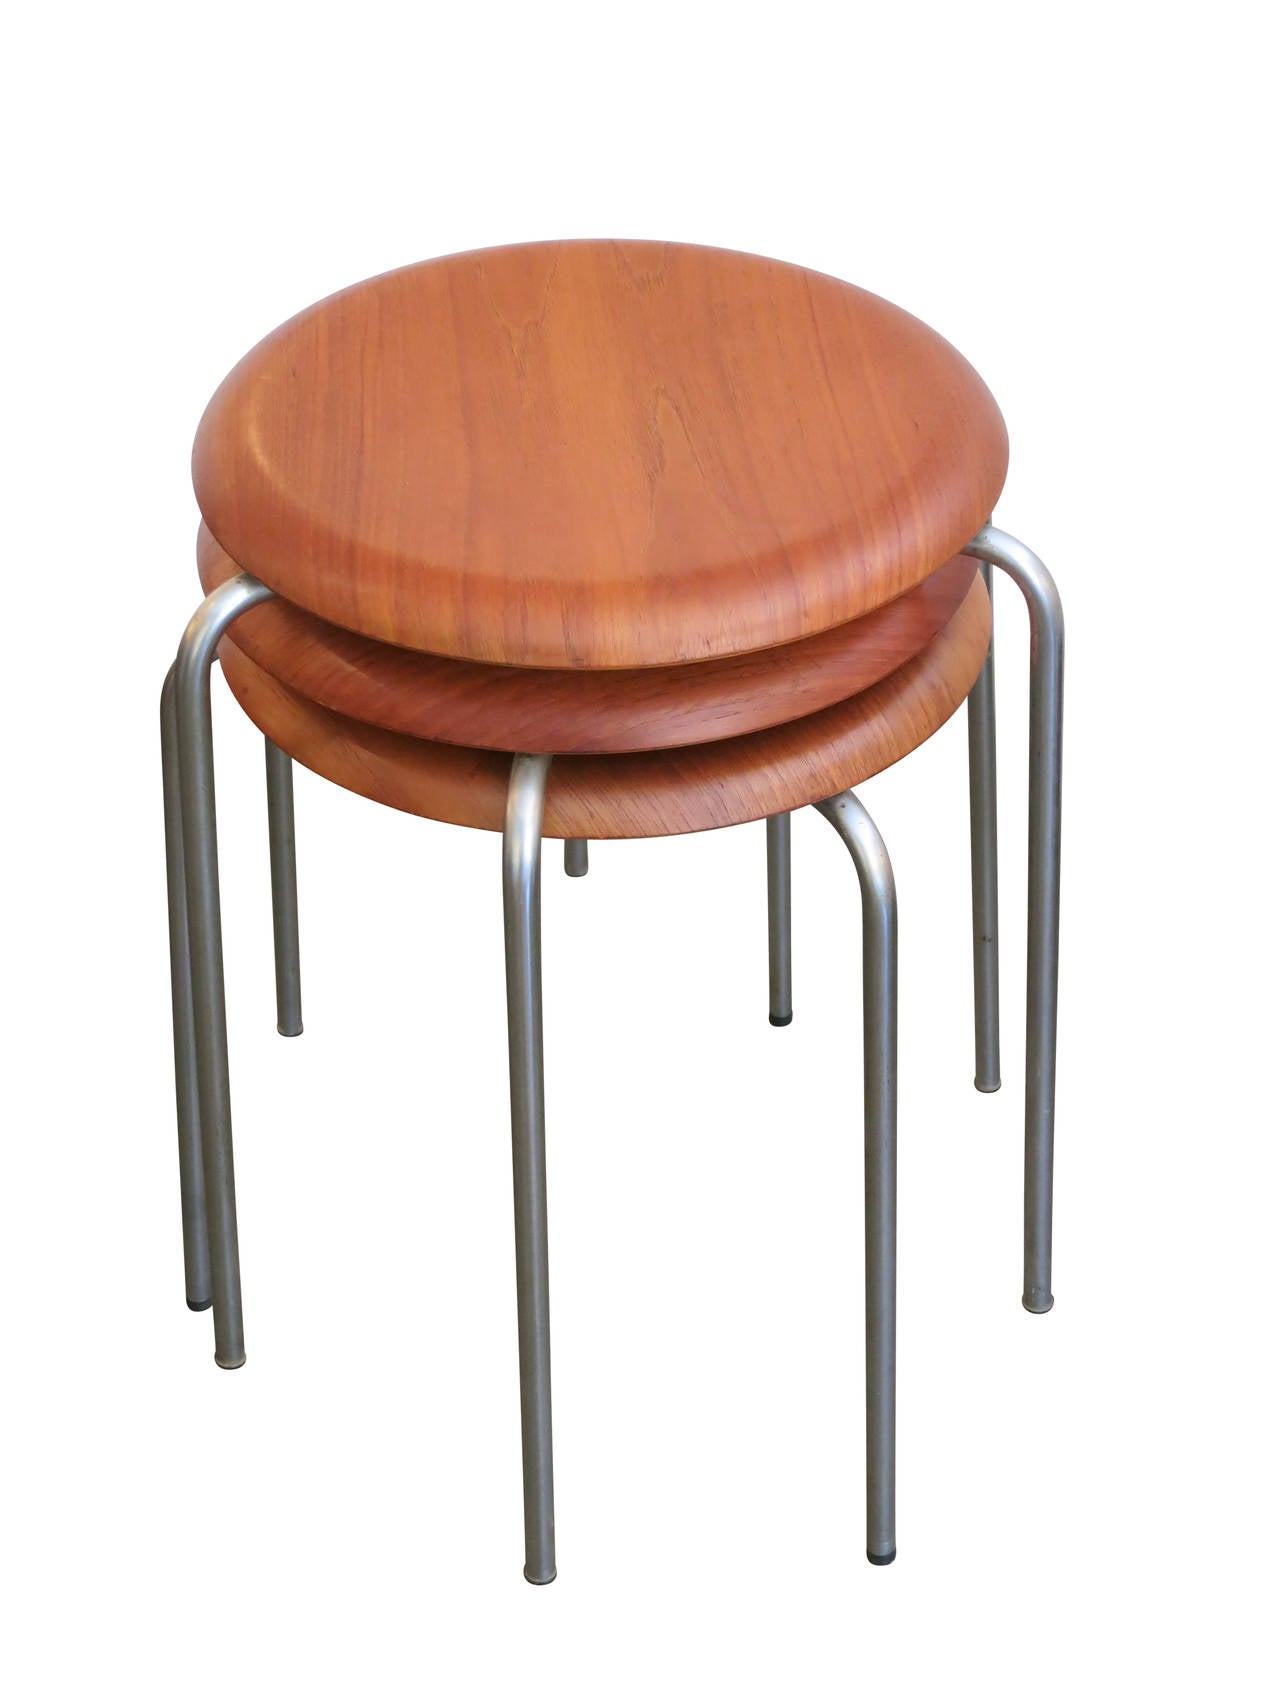 A set of 3 Series 7 stools designed by Arne Jacobsen for Fritz Hansen in 1955. The slightly curved teak seat rounds at the edge and is supported by three chromed steel legs. Stackable for storage or display.